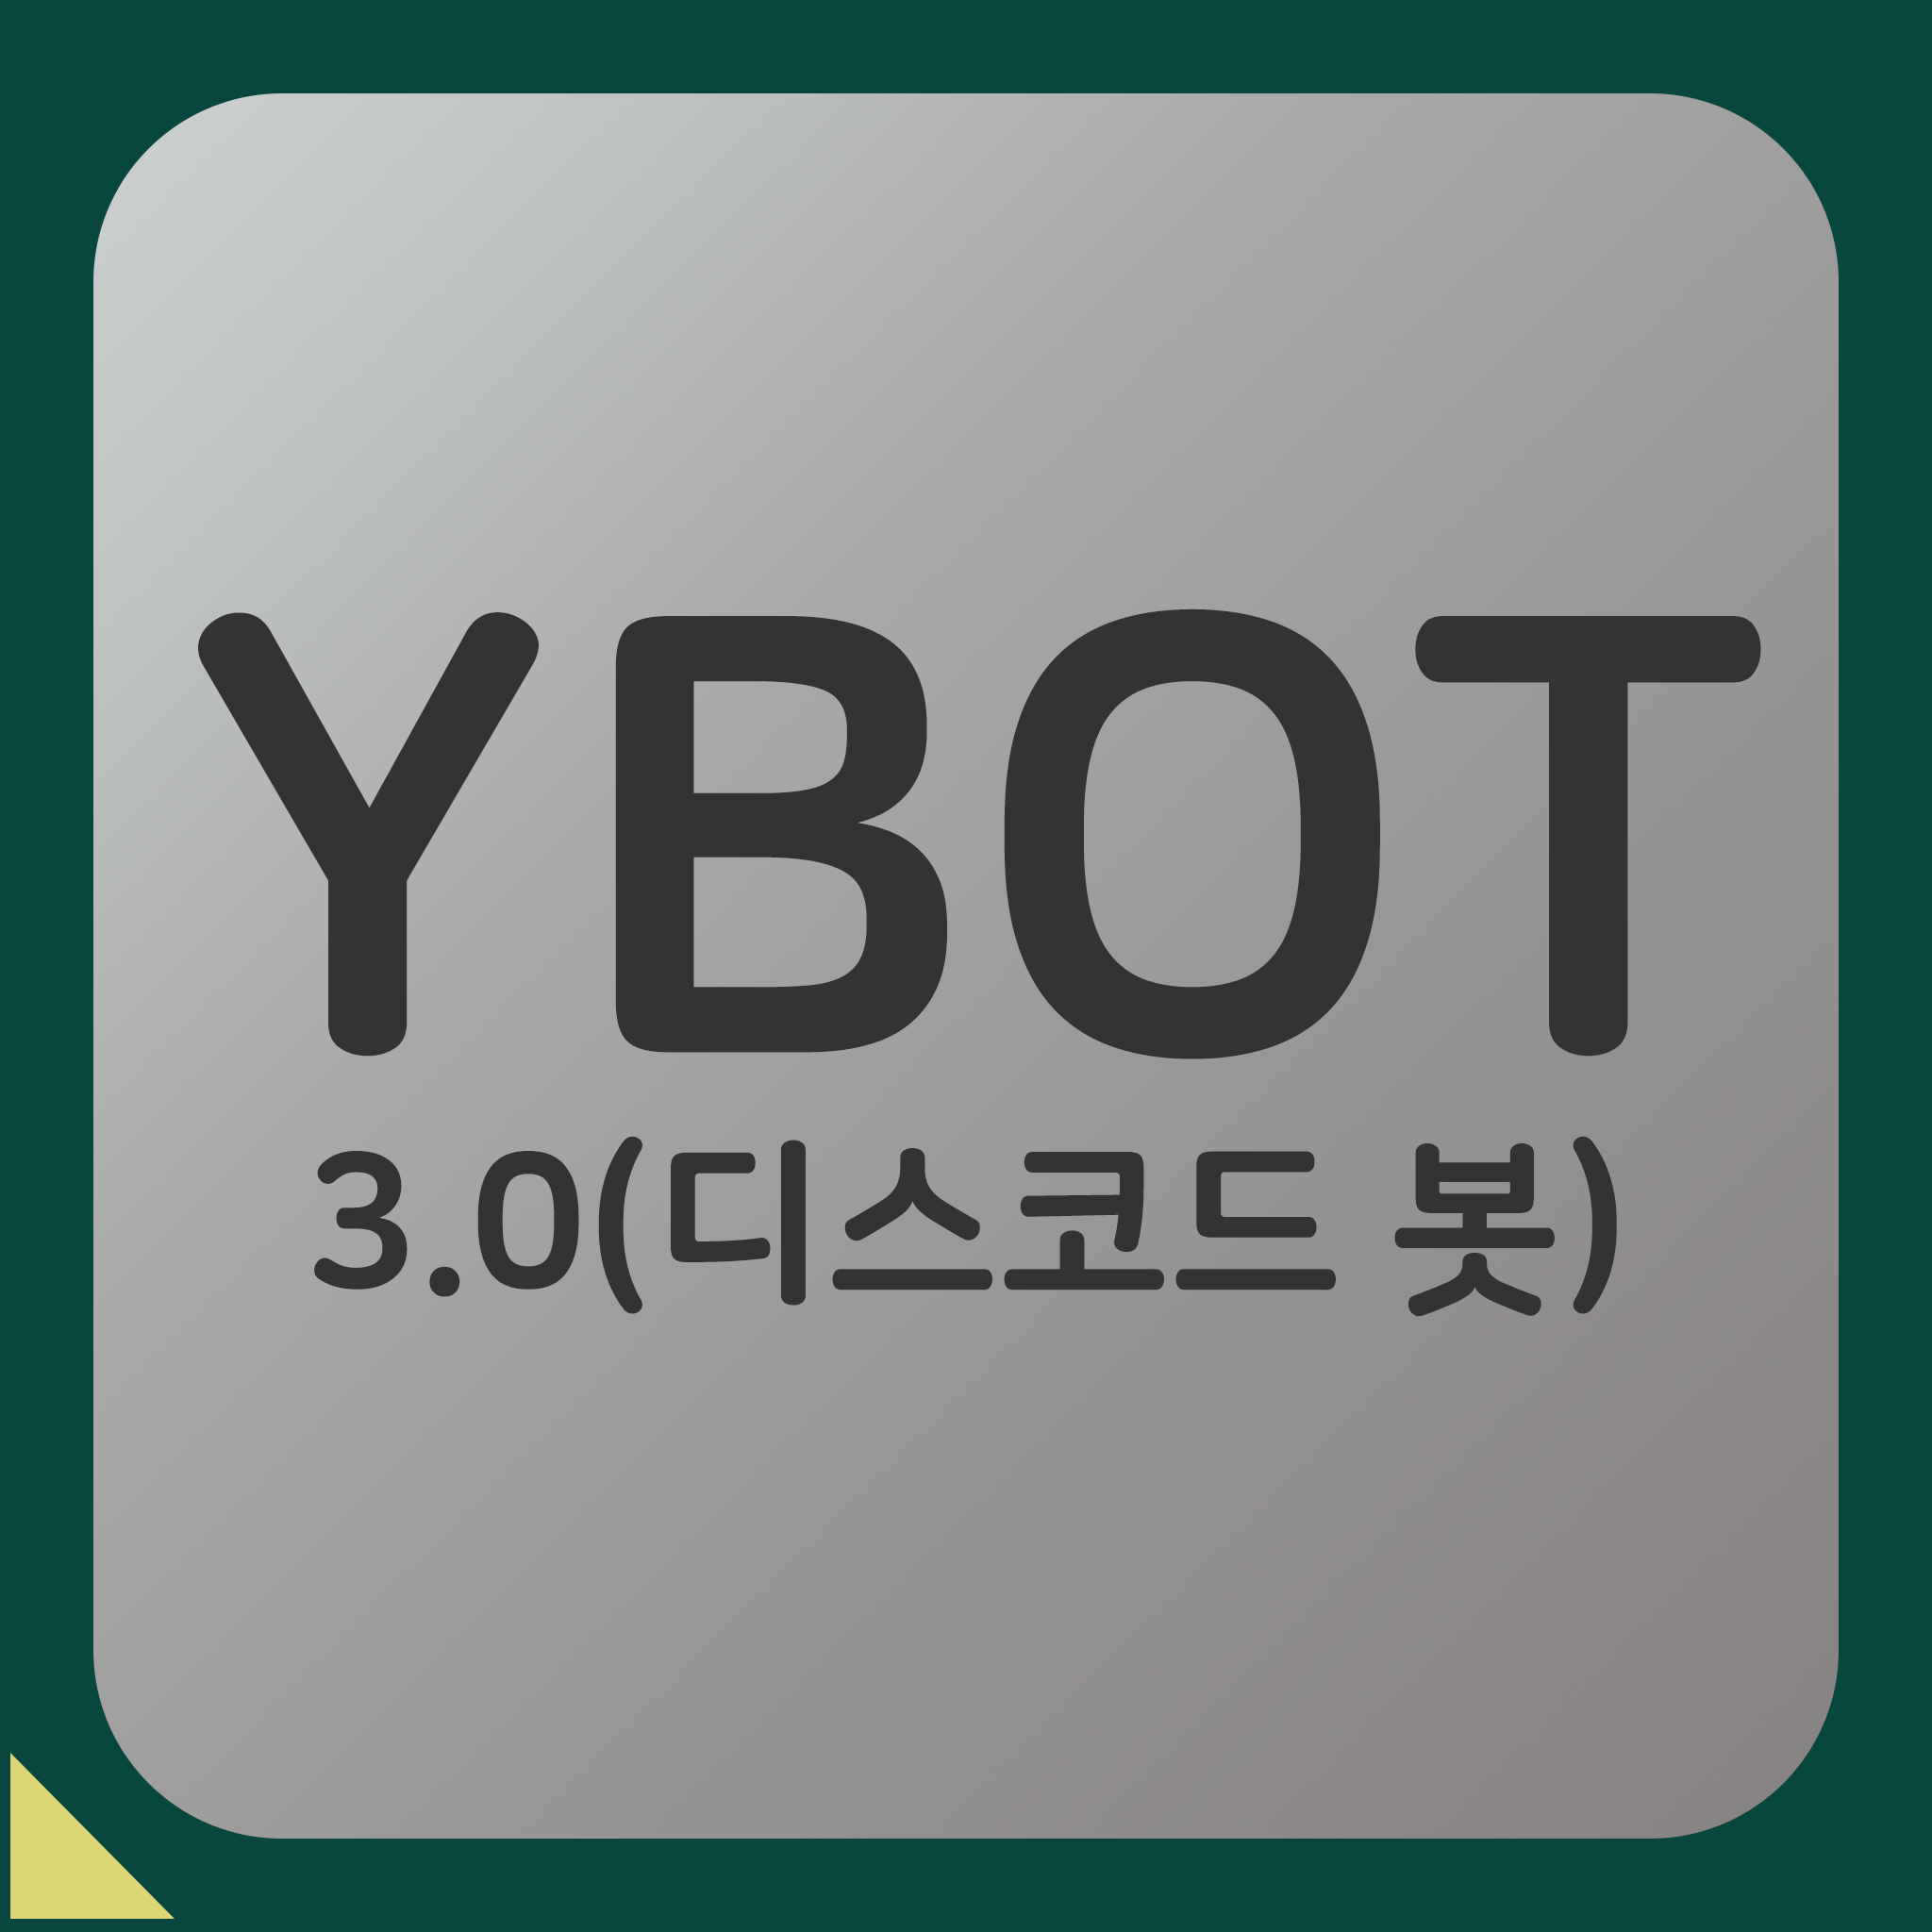 Project YBOT